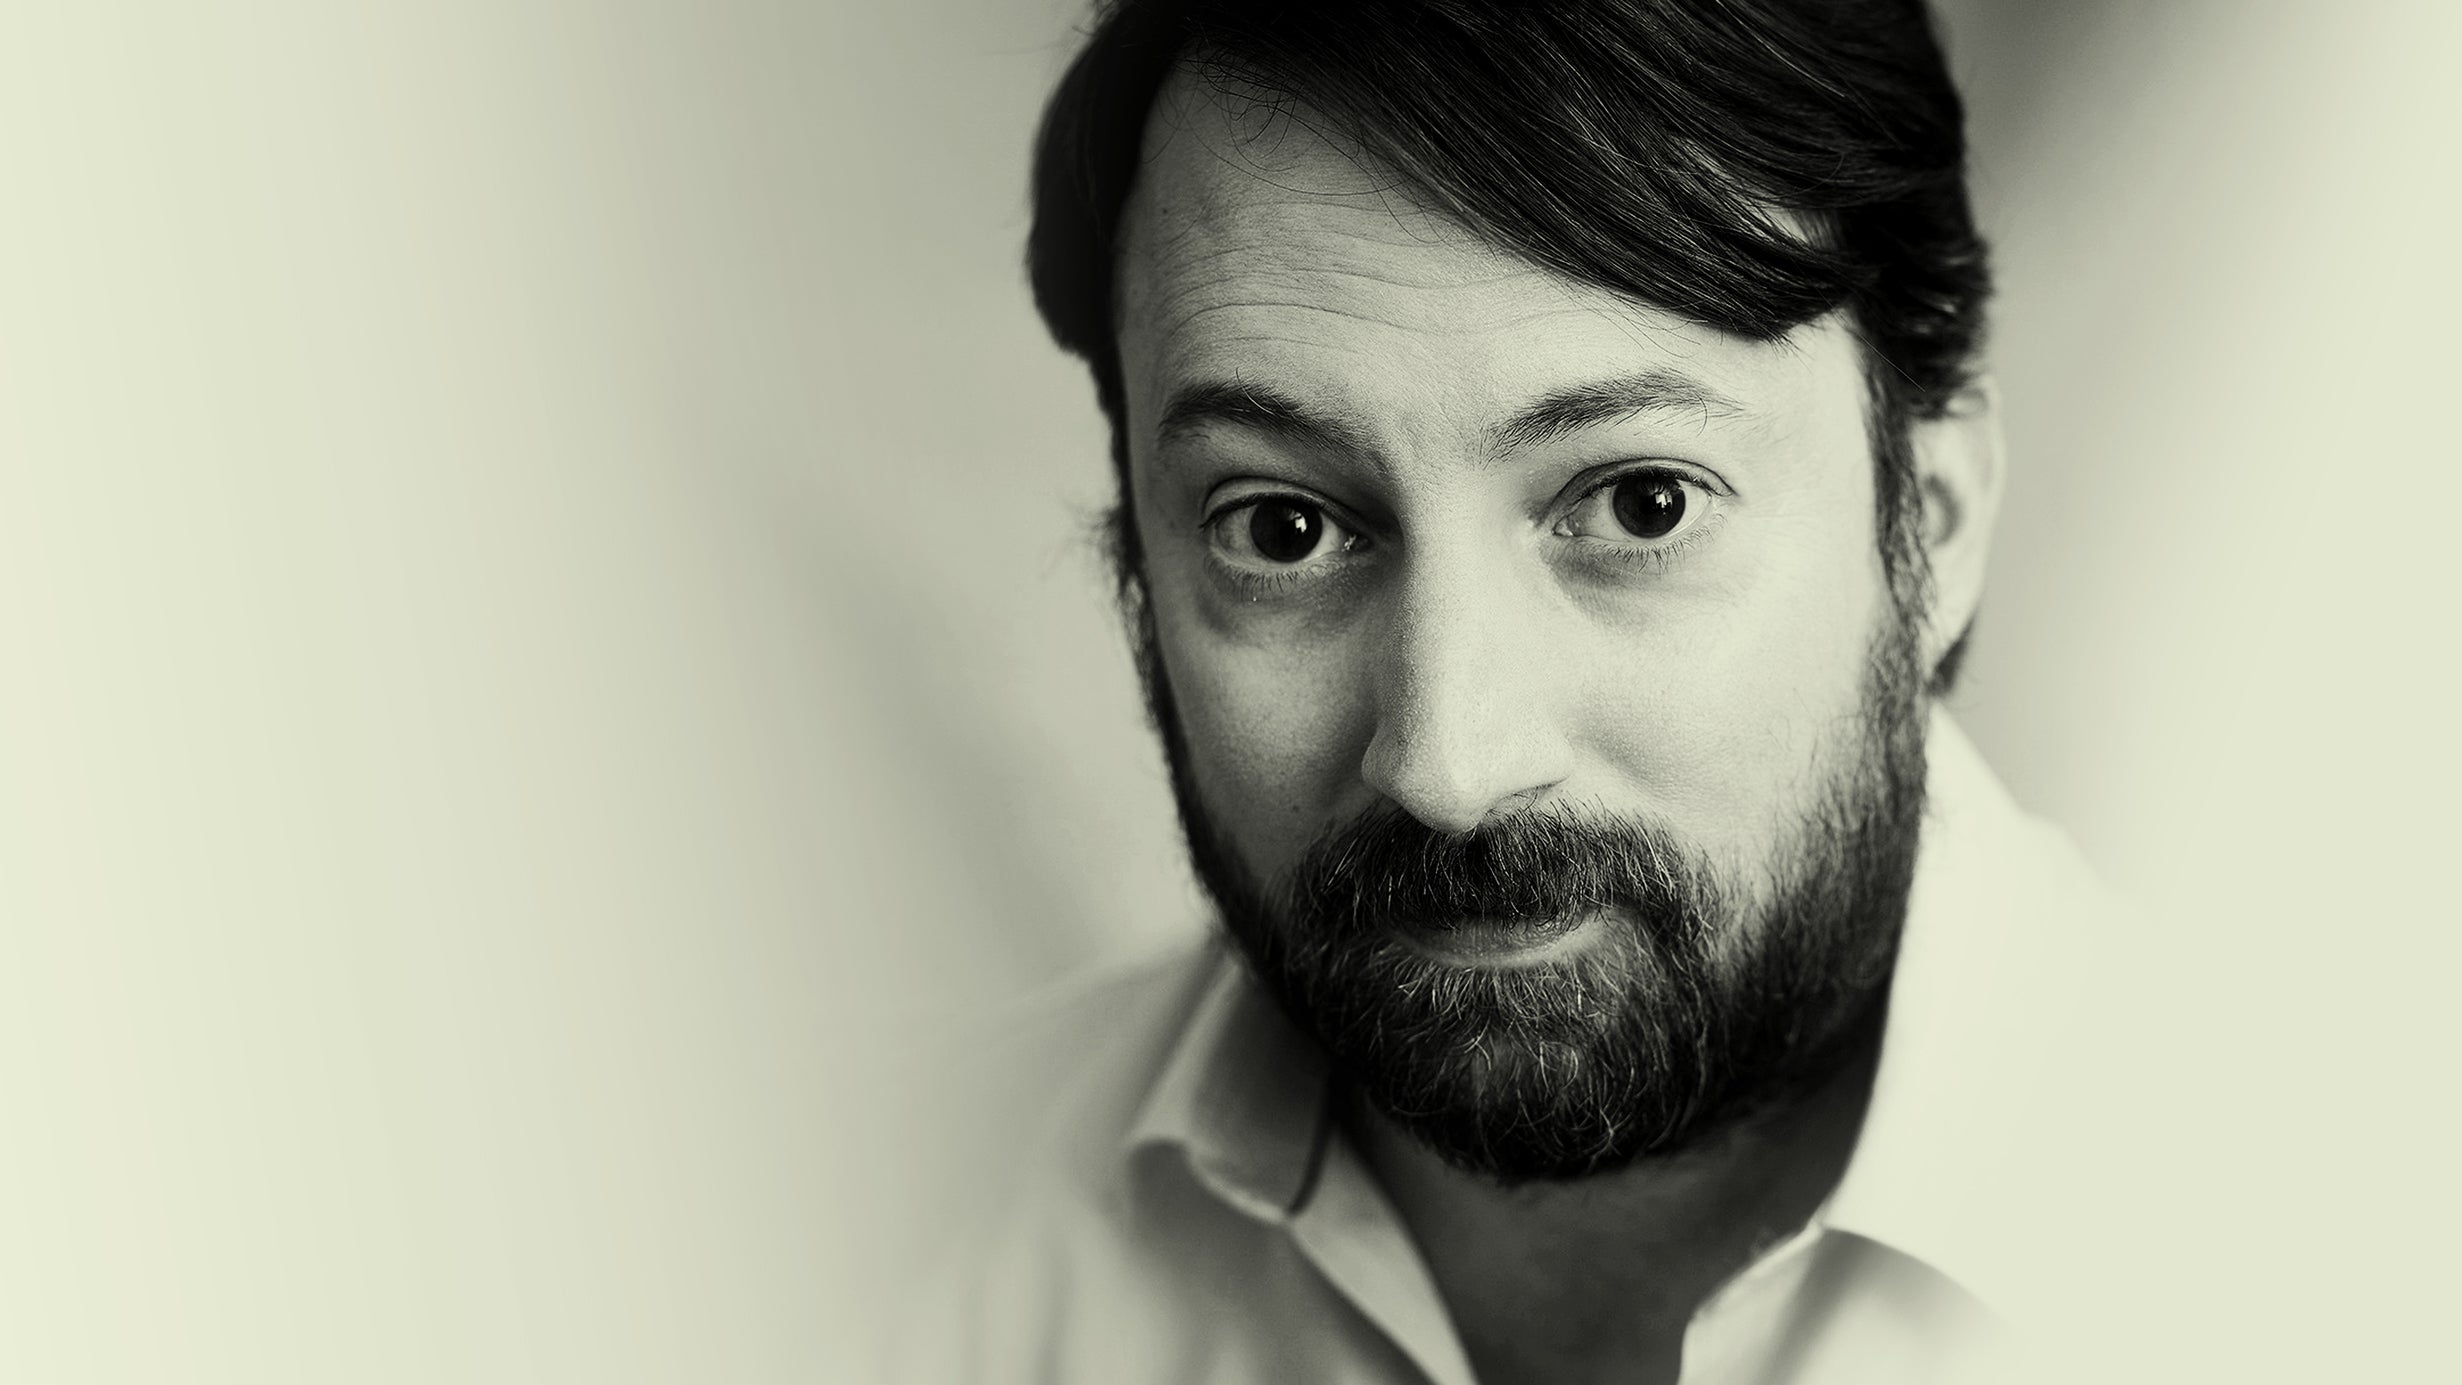 Unruly: In Conversation With David Mitchell about his new book Event Title Pic